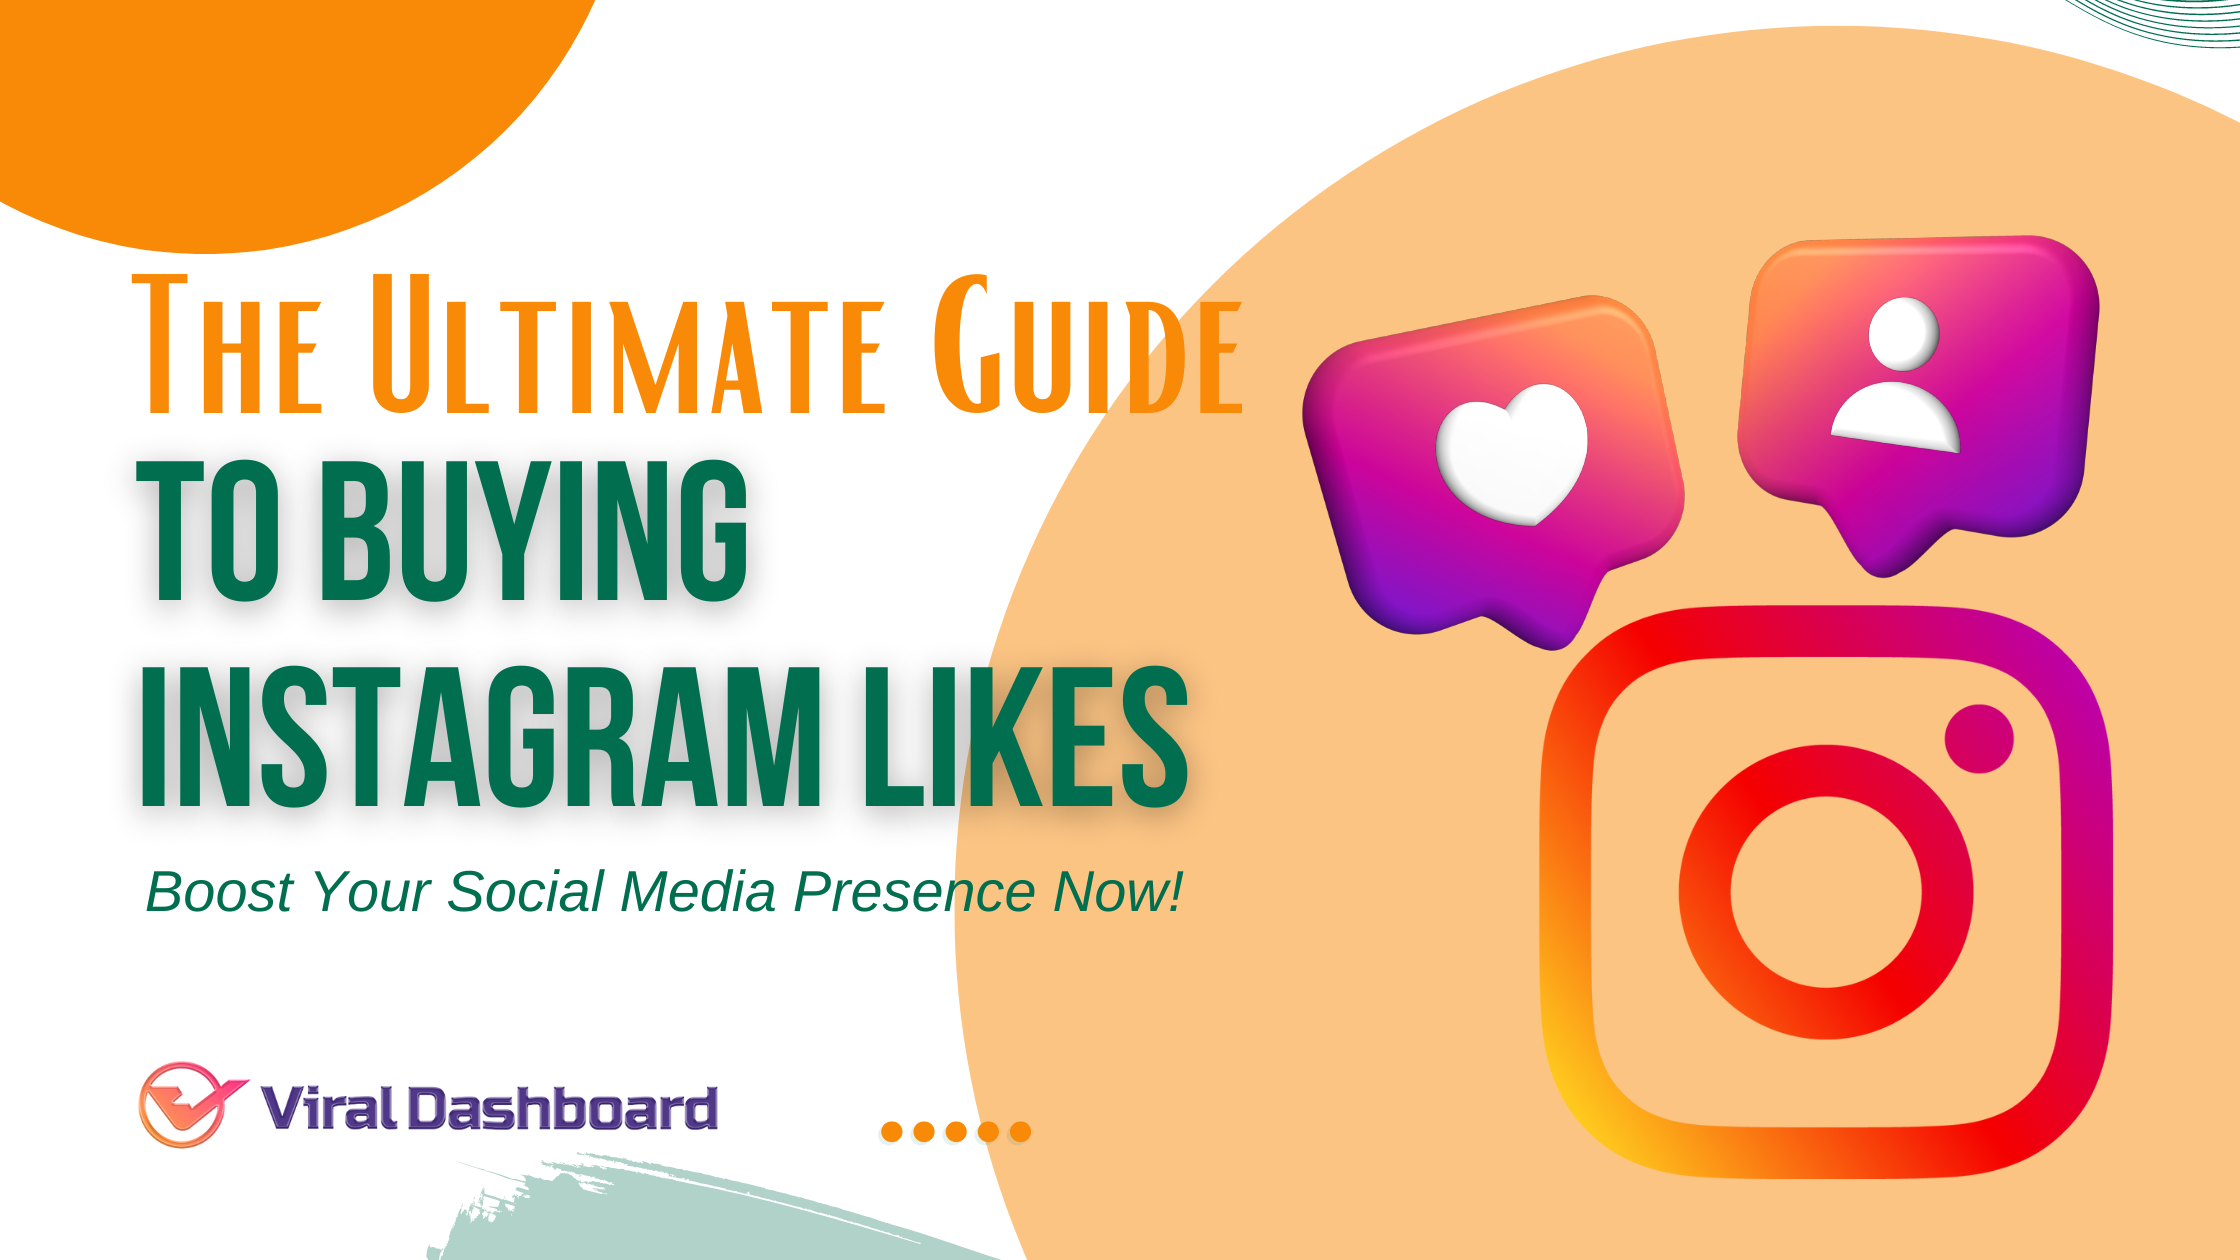 The Ultimate Guide to Buying Instagram Likes: Boost Your Social Media Presence Now!